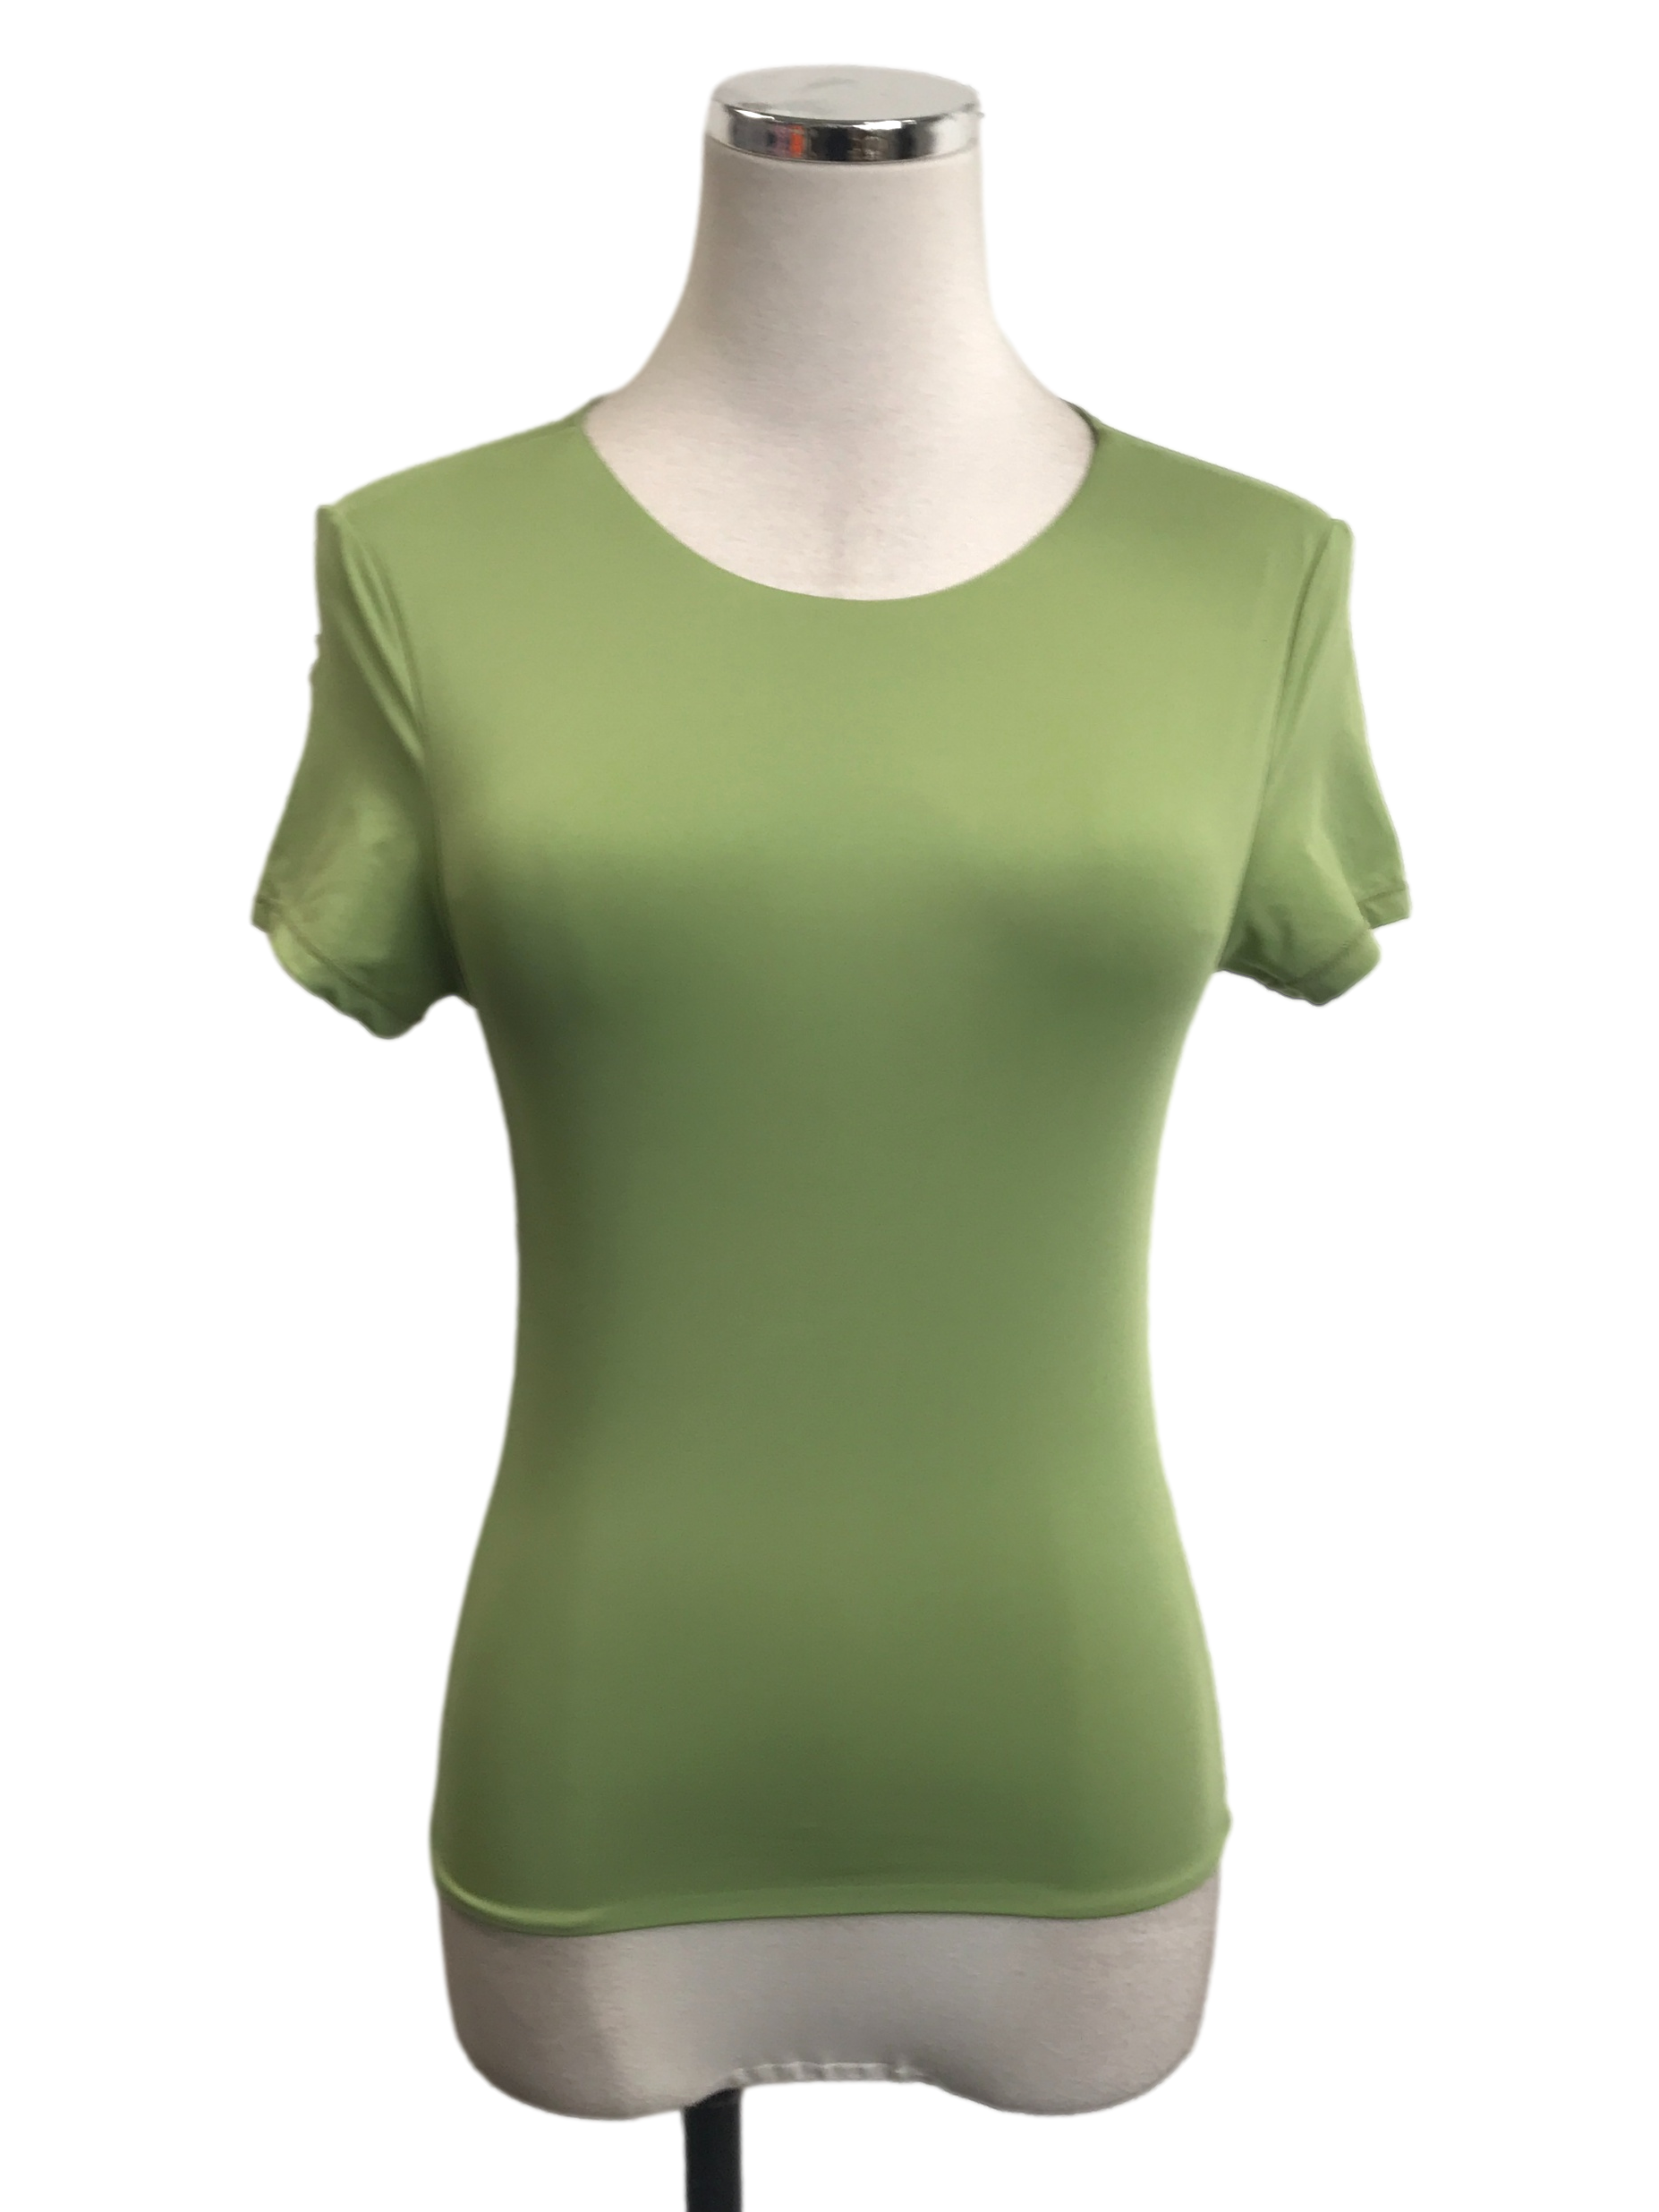 Kelly Green Recycled Plastic Short Sleeve Top